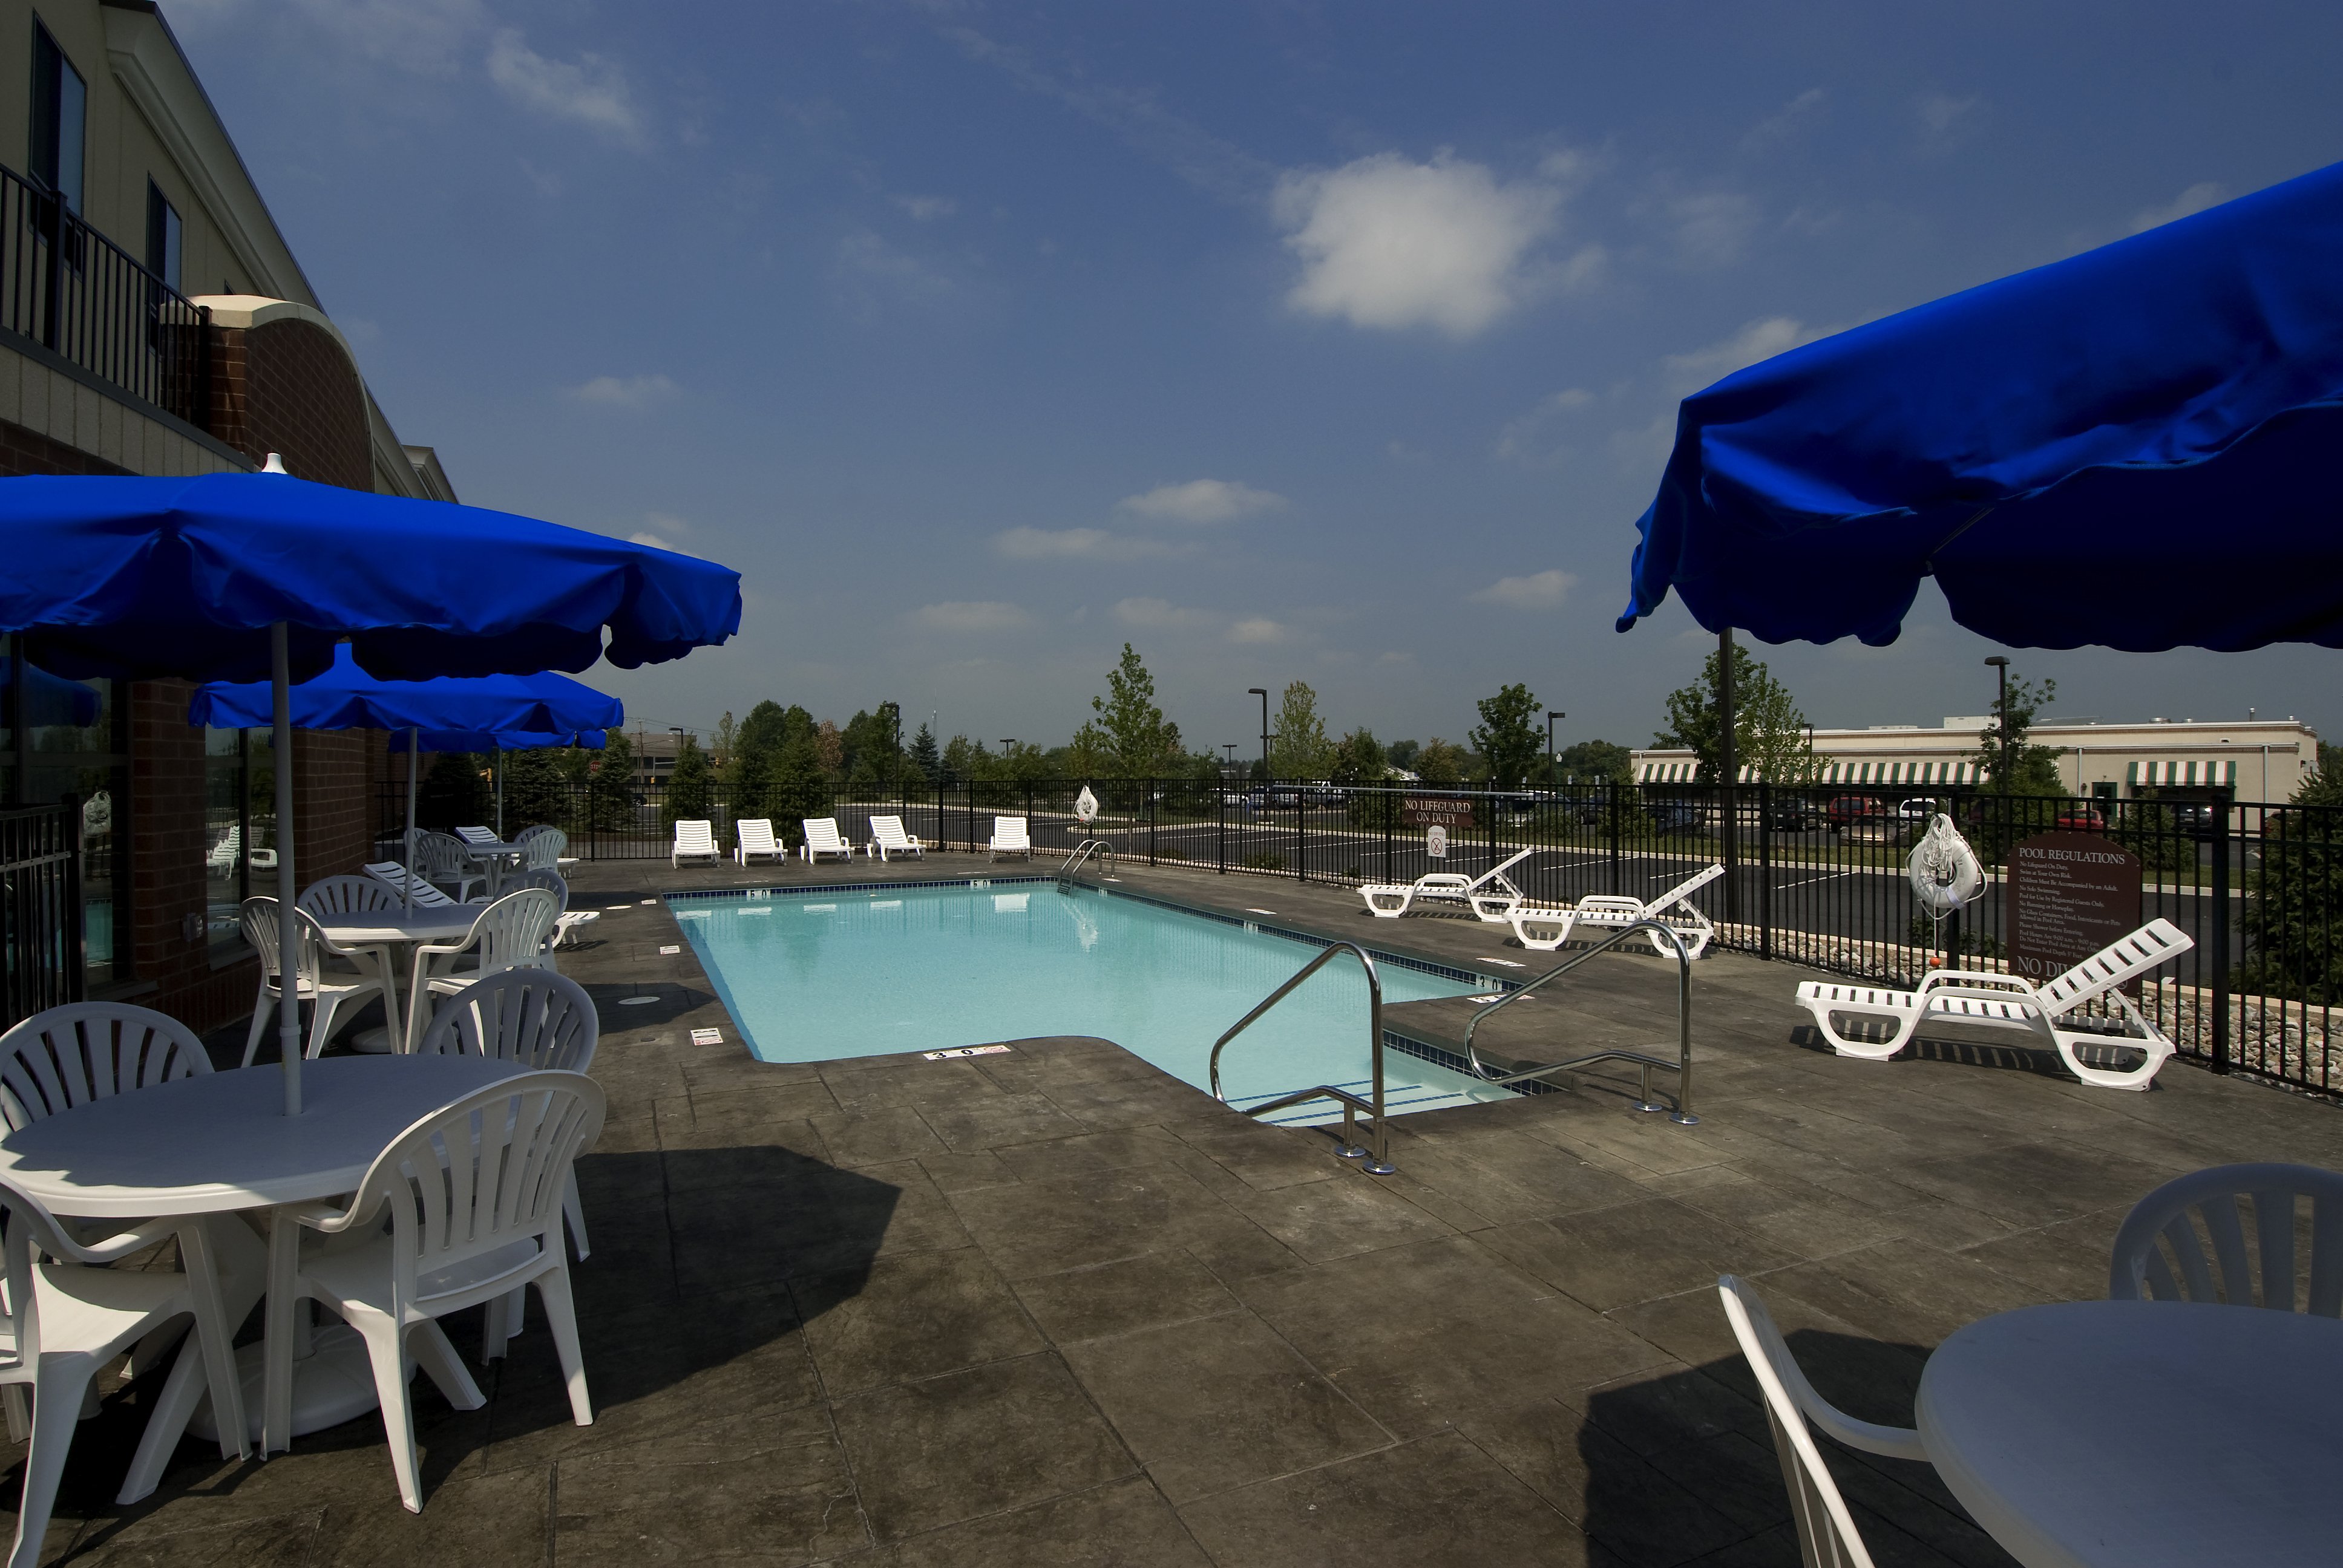 Enjoy our outdoor Swimming Pool! Open Memorial Day to Labor Day.